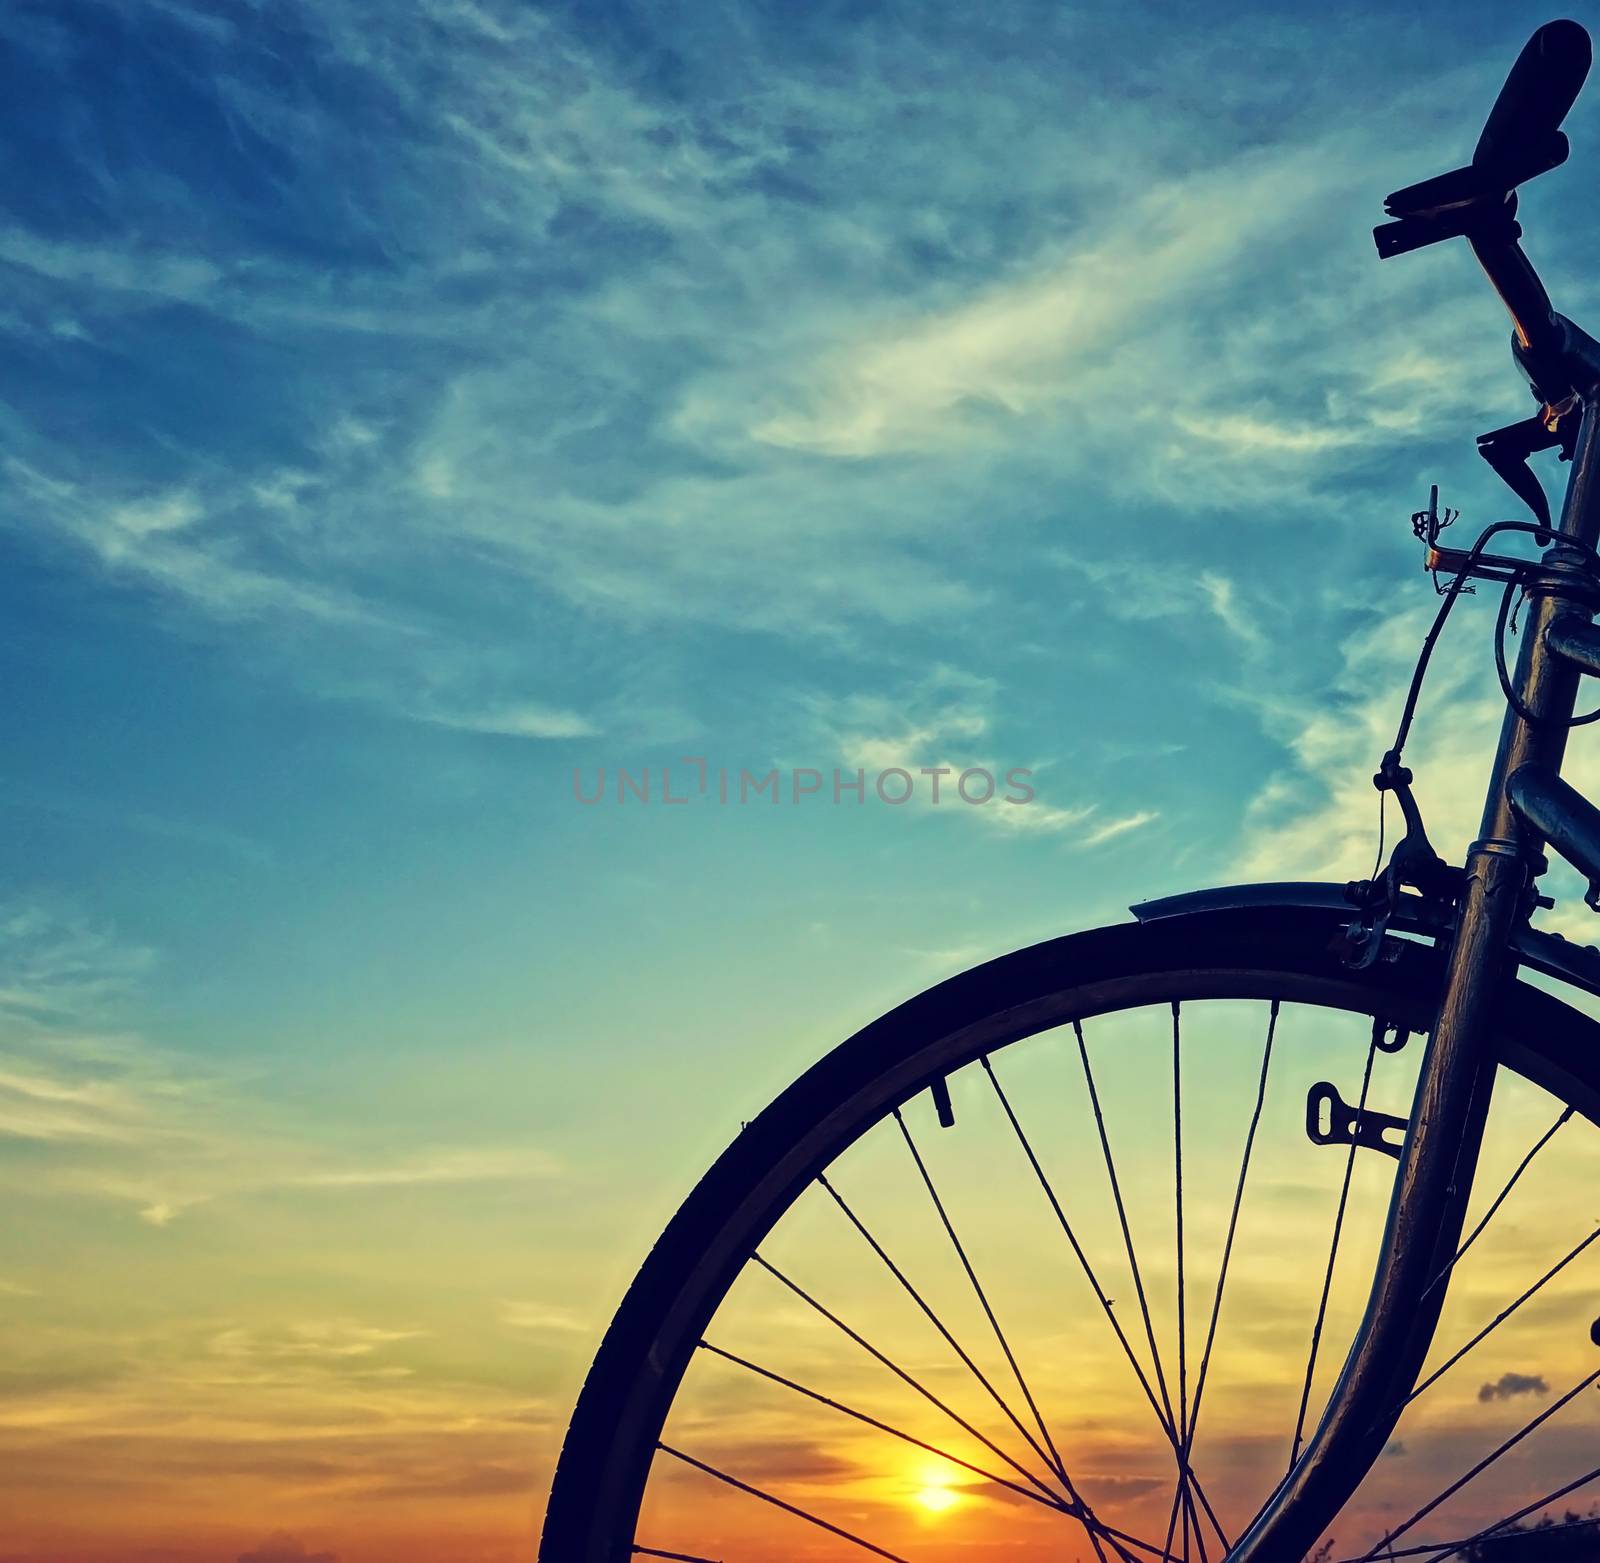 Beautiful close up scene of bicycle at sunset, sun on blue sky with vintage colors, silhouette of bike forward to sun, wonderful rural of Mekong Delta, Vietnam countryside